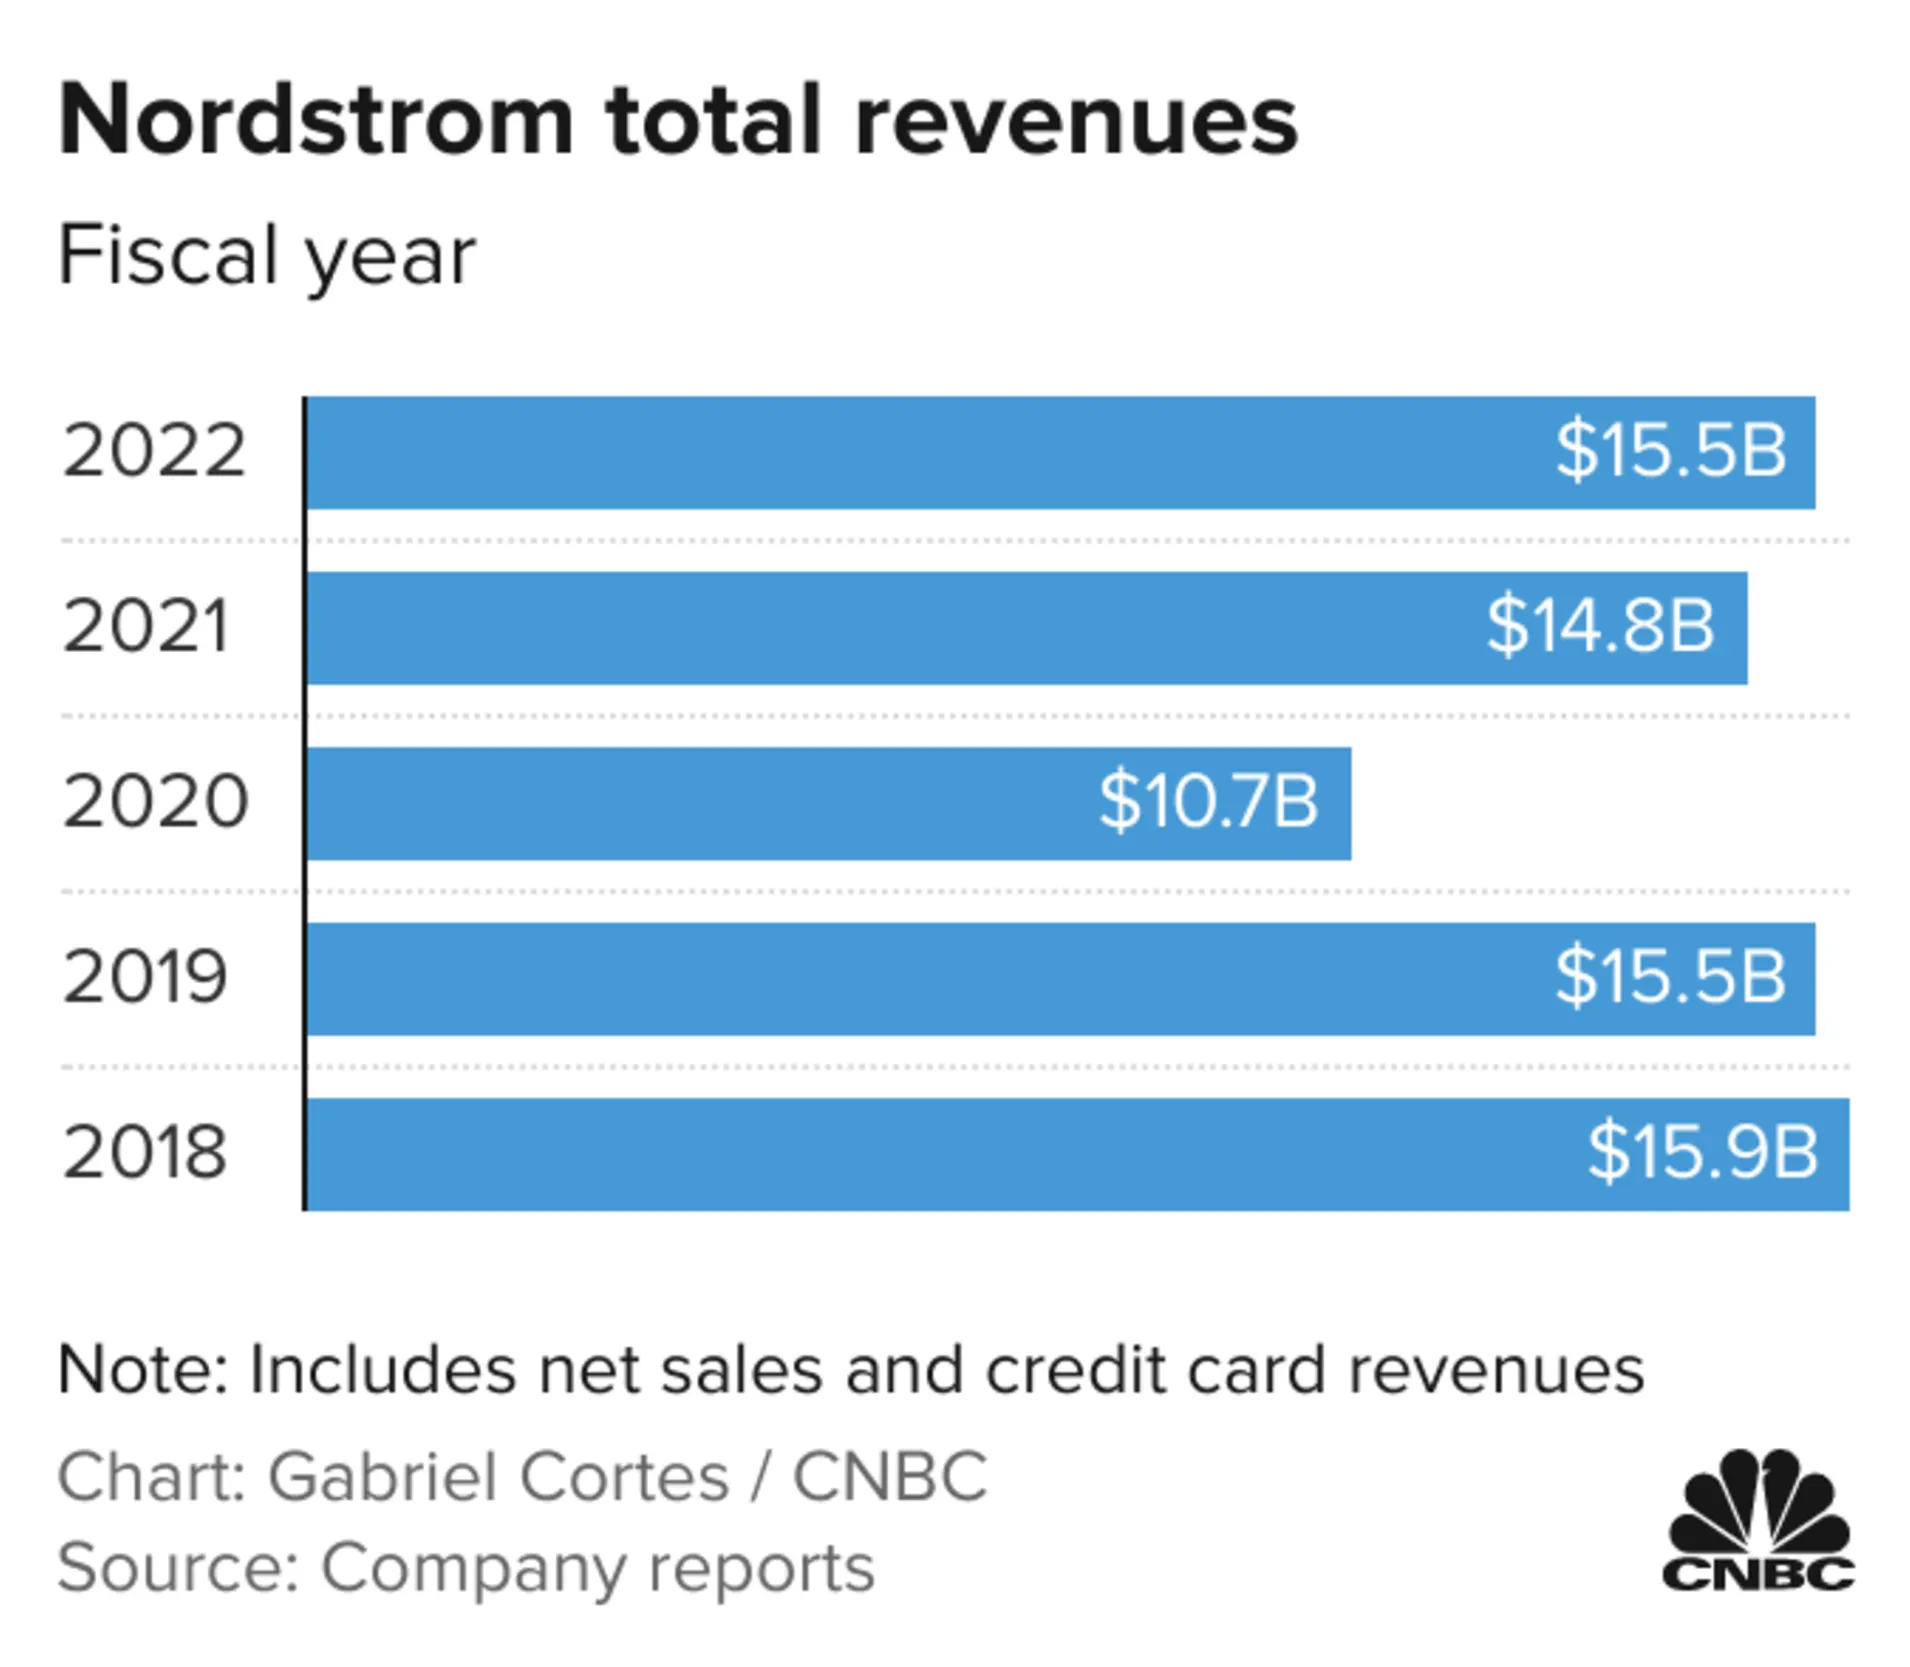 The horizontal bars show Nordstrom's total revenues (including net sales and credit card revenues) from fiscal years 2018 through 2022.